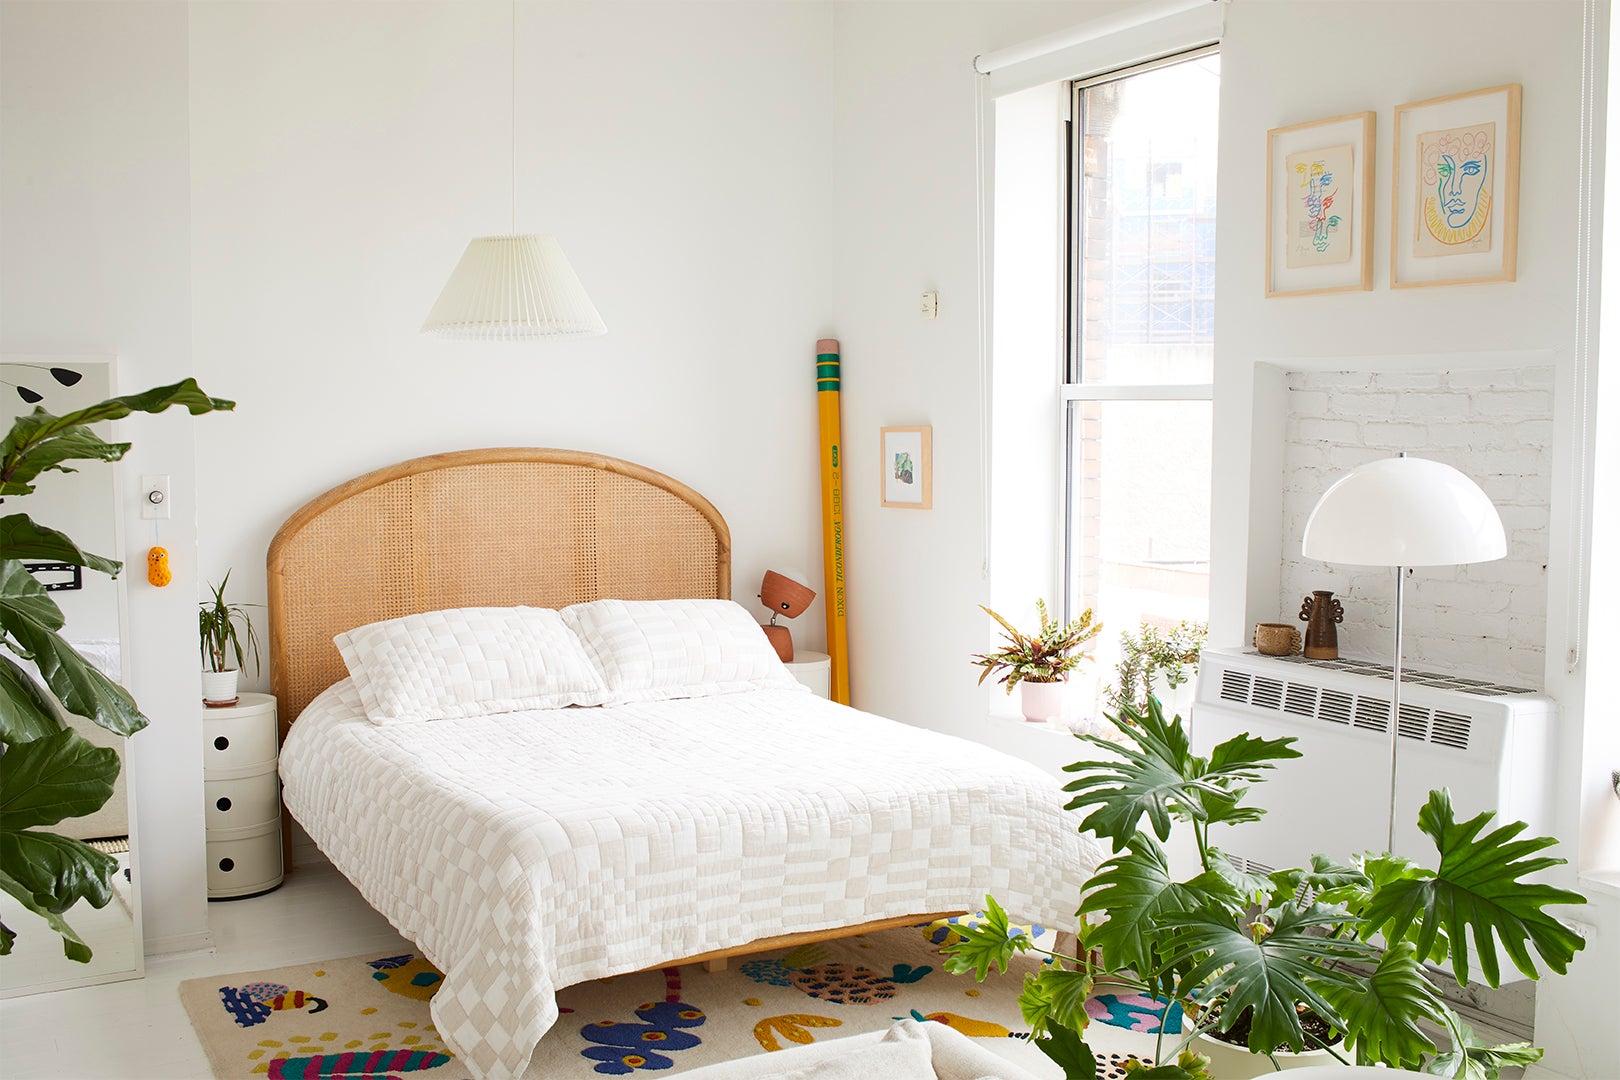 White bedroom with quirky accessories and plants